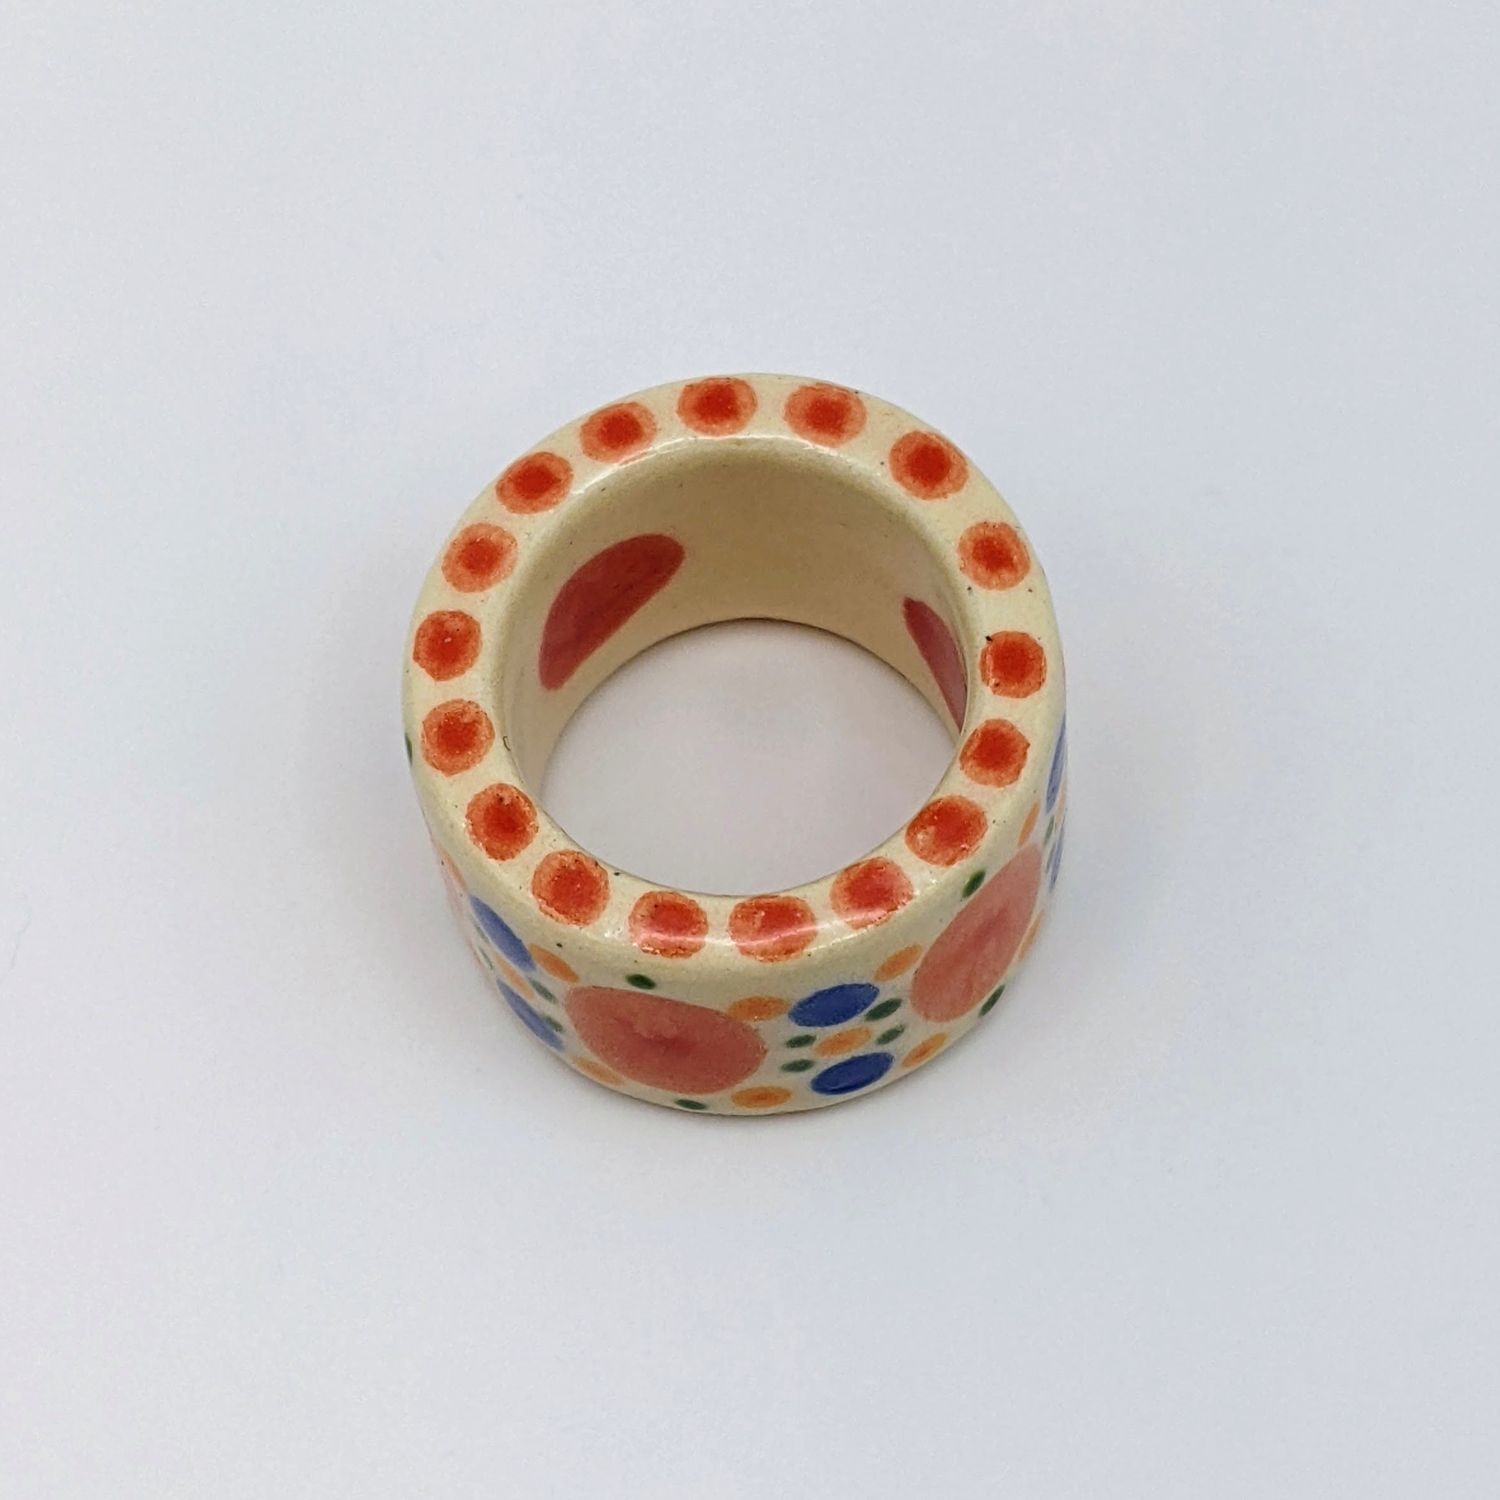 Here and Here: Blue and Orange Dot Ceramic Ring – Medium Product Image 2 of 2